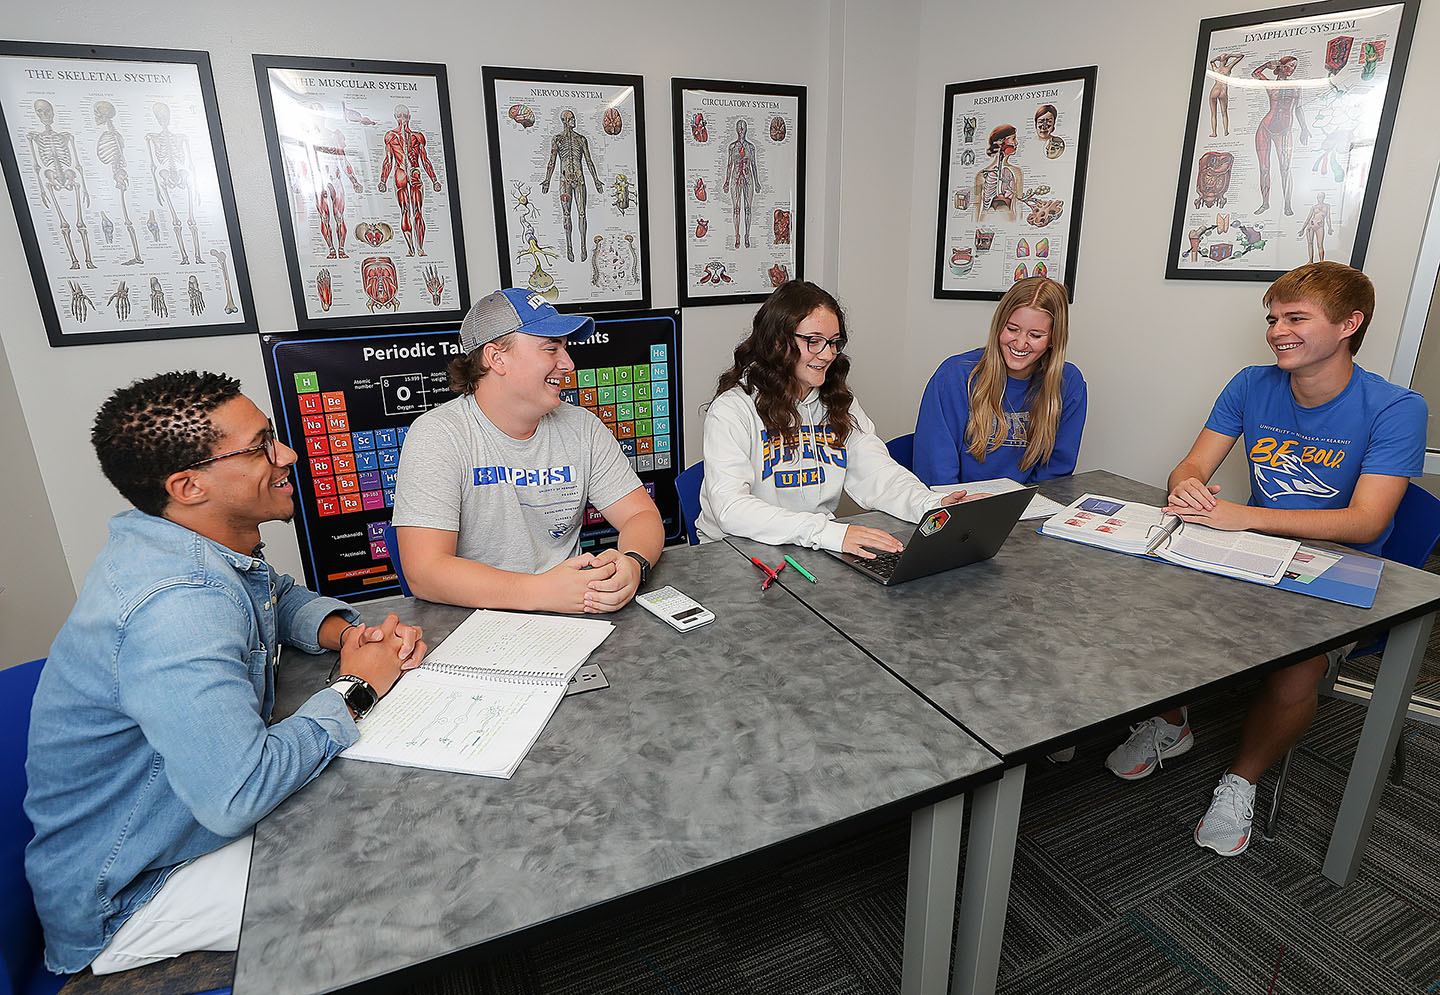 UNK offers one-on-one mentoring and advising, residential learning communities and a variety of group activities to support health science students. (Photos by Erika Pritchard, UNK Communications)